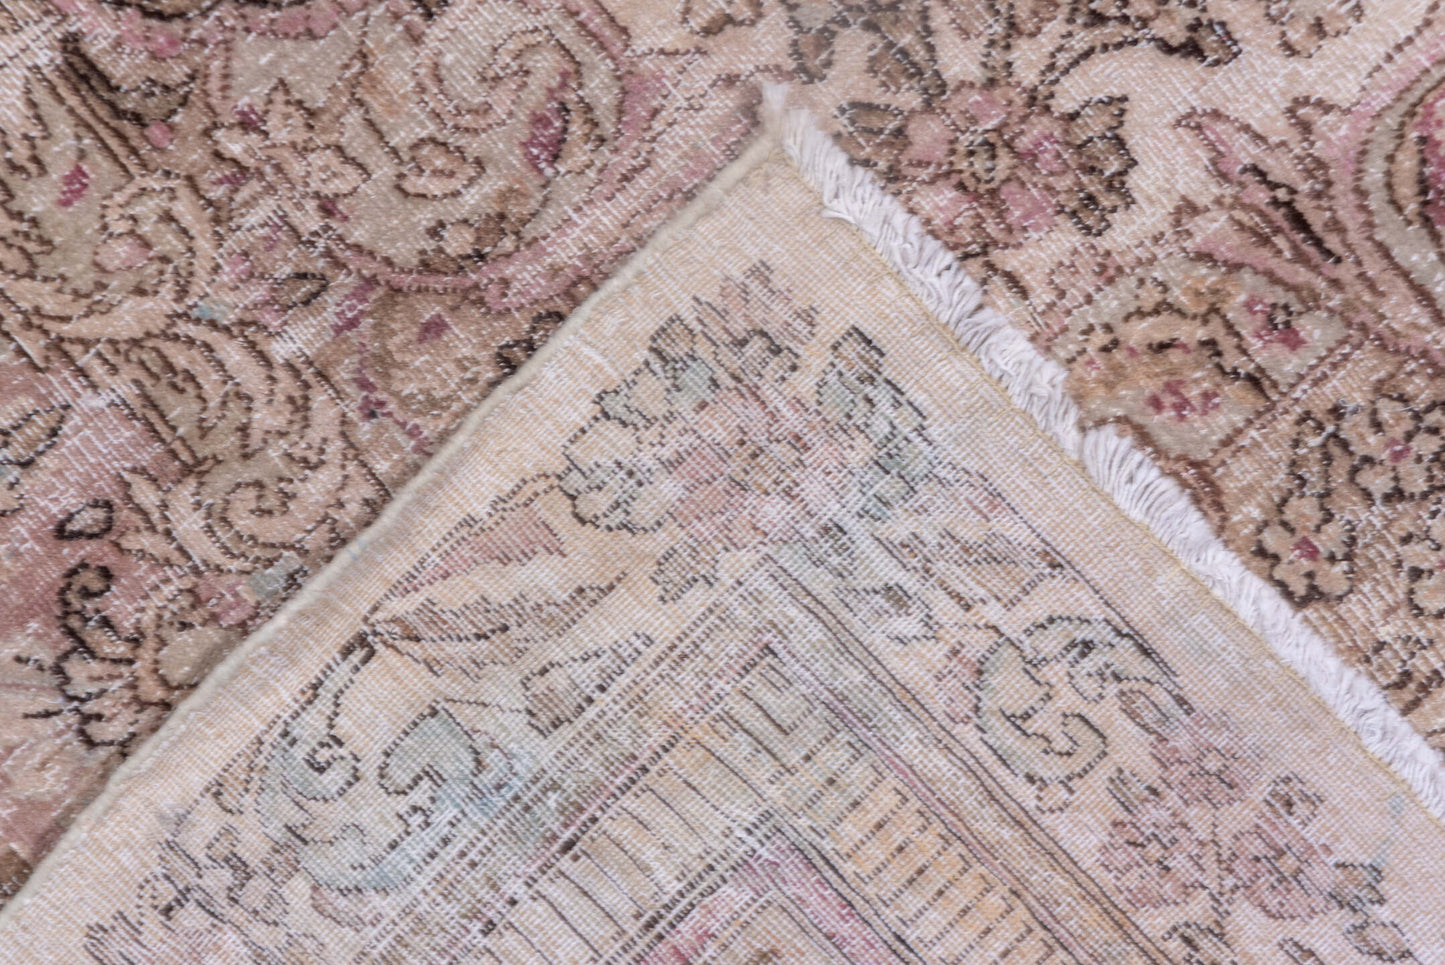 (Reserved- please inquire) Antique Persian Kerman Rug